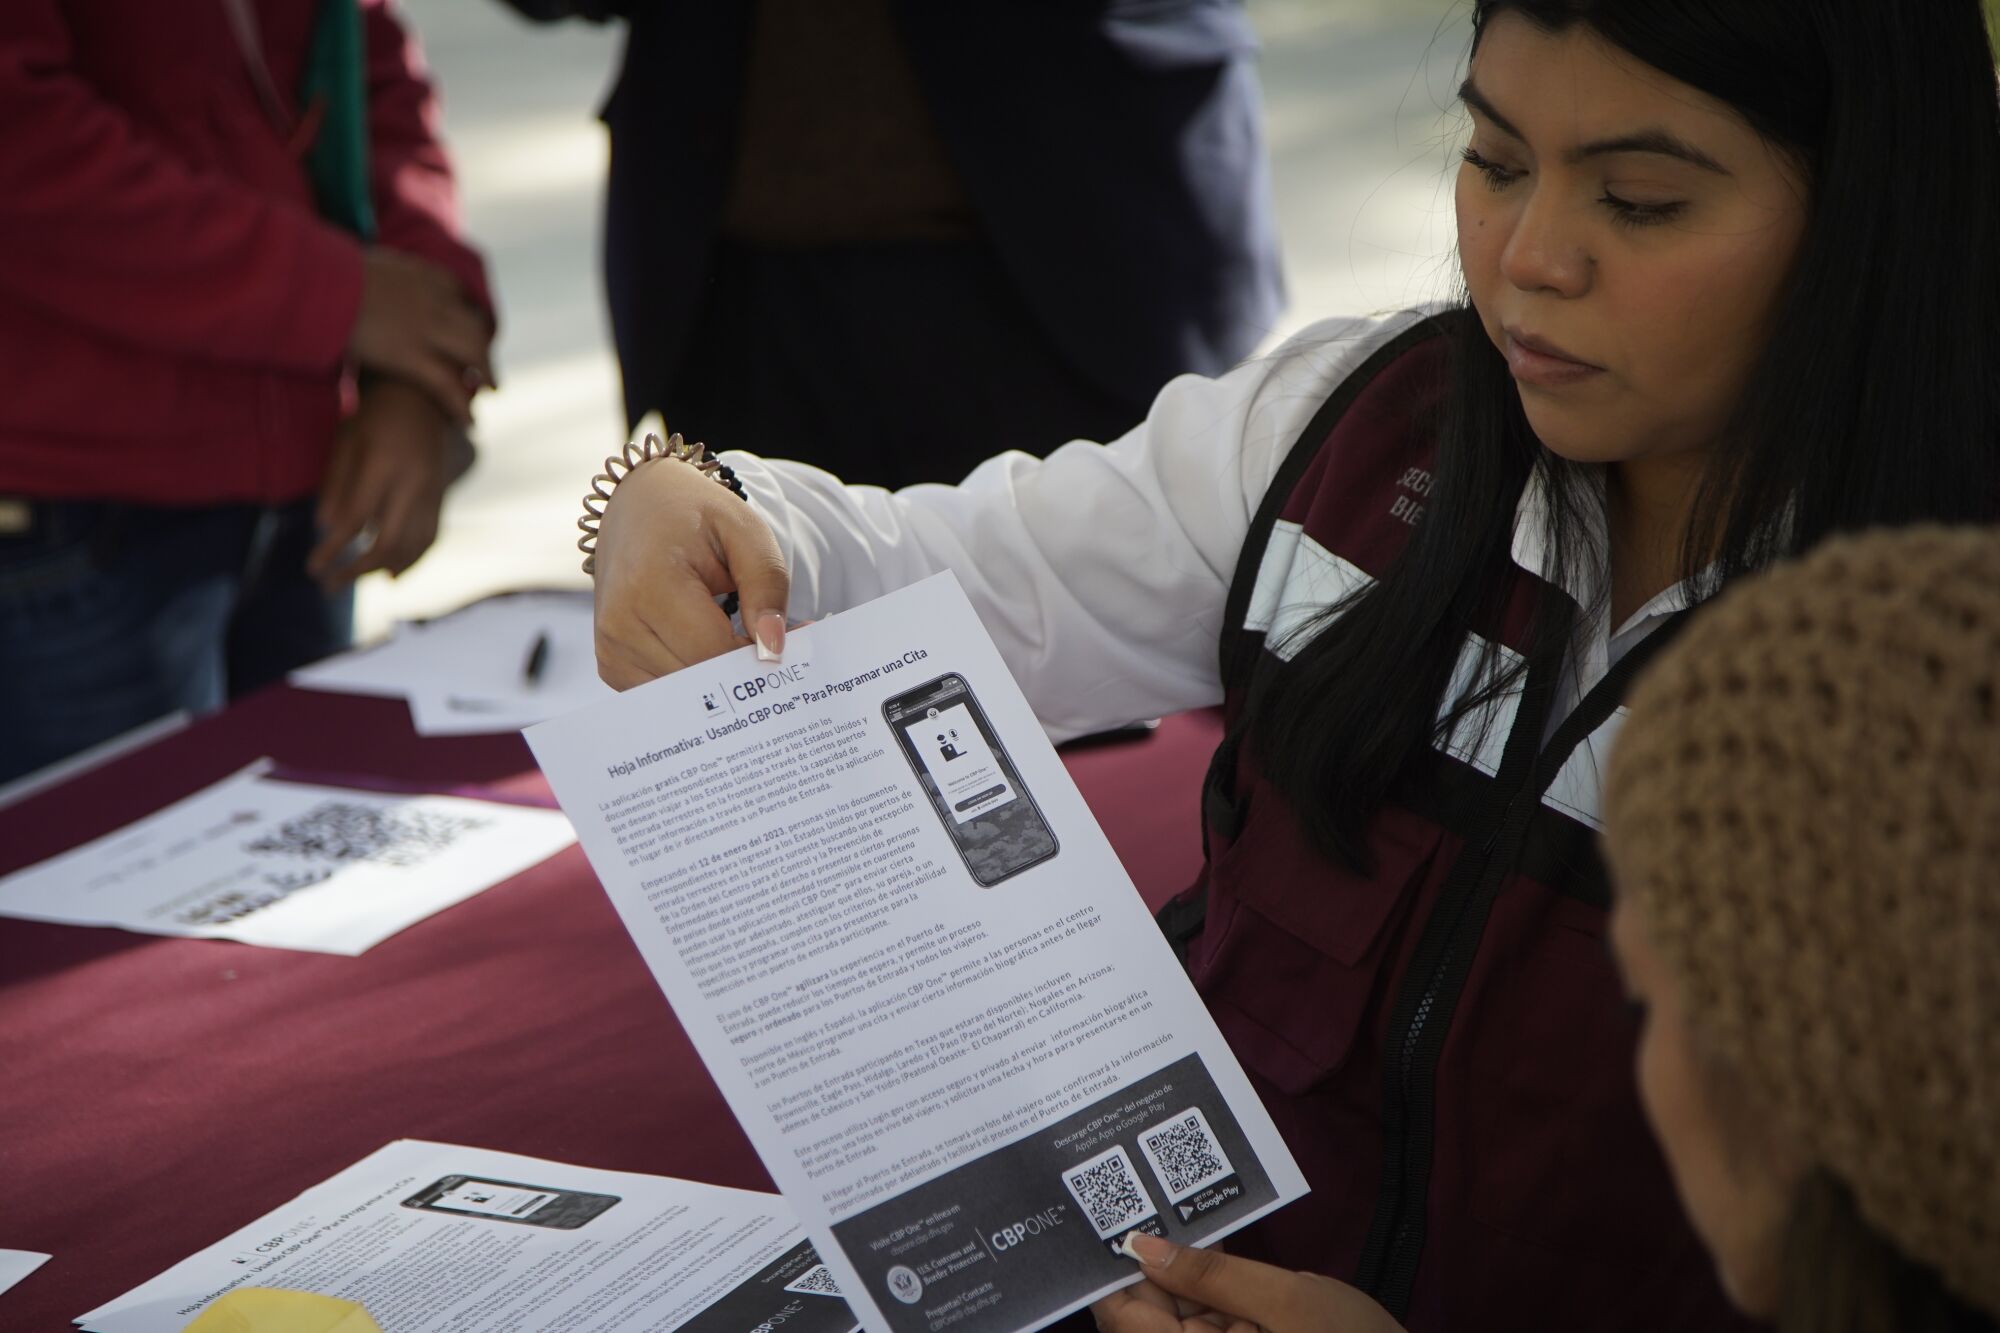 A worker shows information about CBP One to a woman in Michoacan